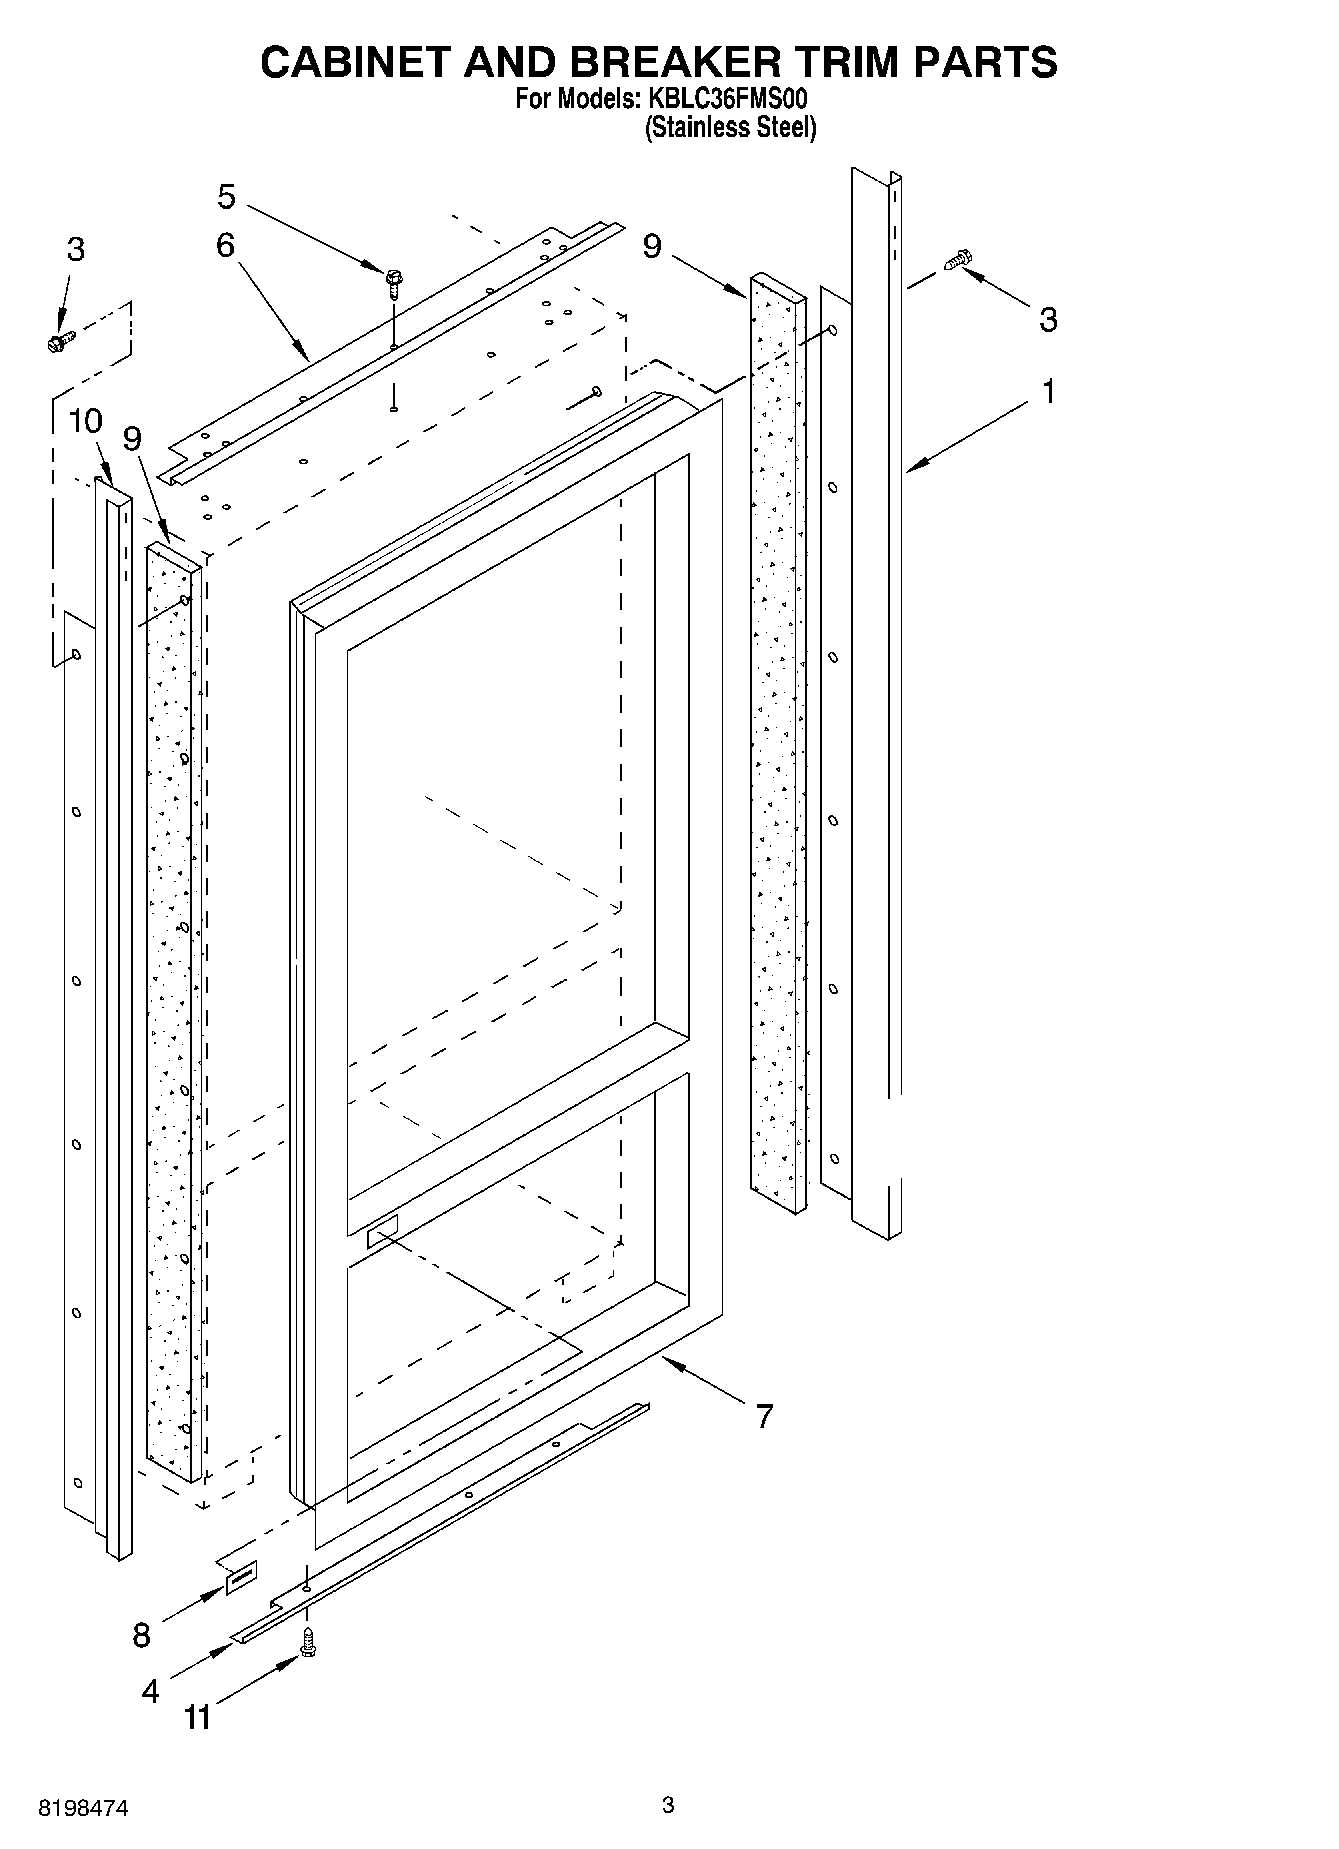 02 - CABINET AND BREAKER TRIM PARTS